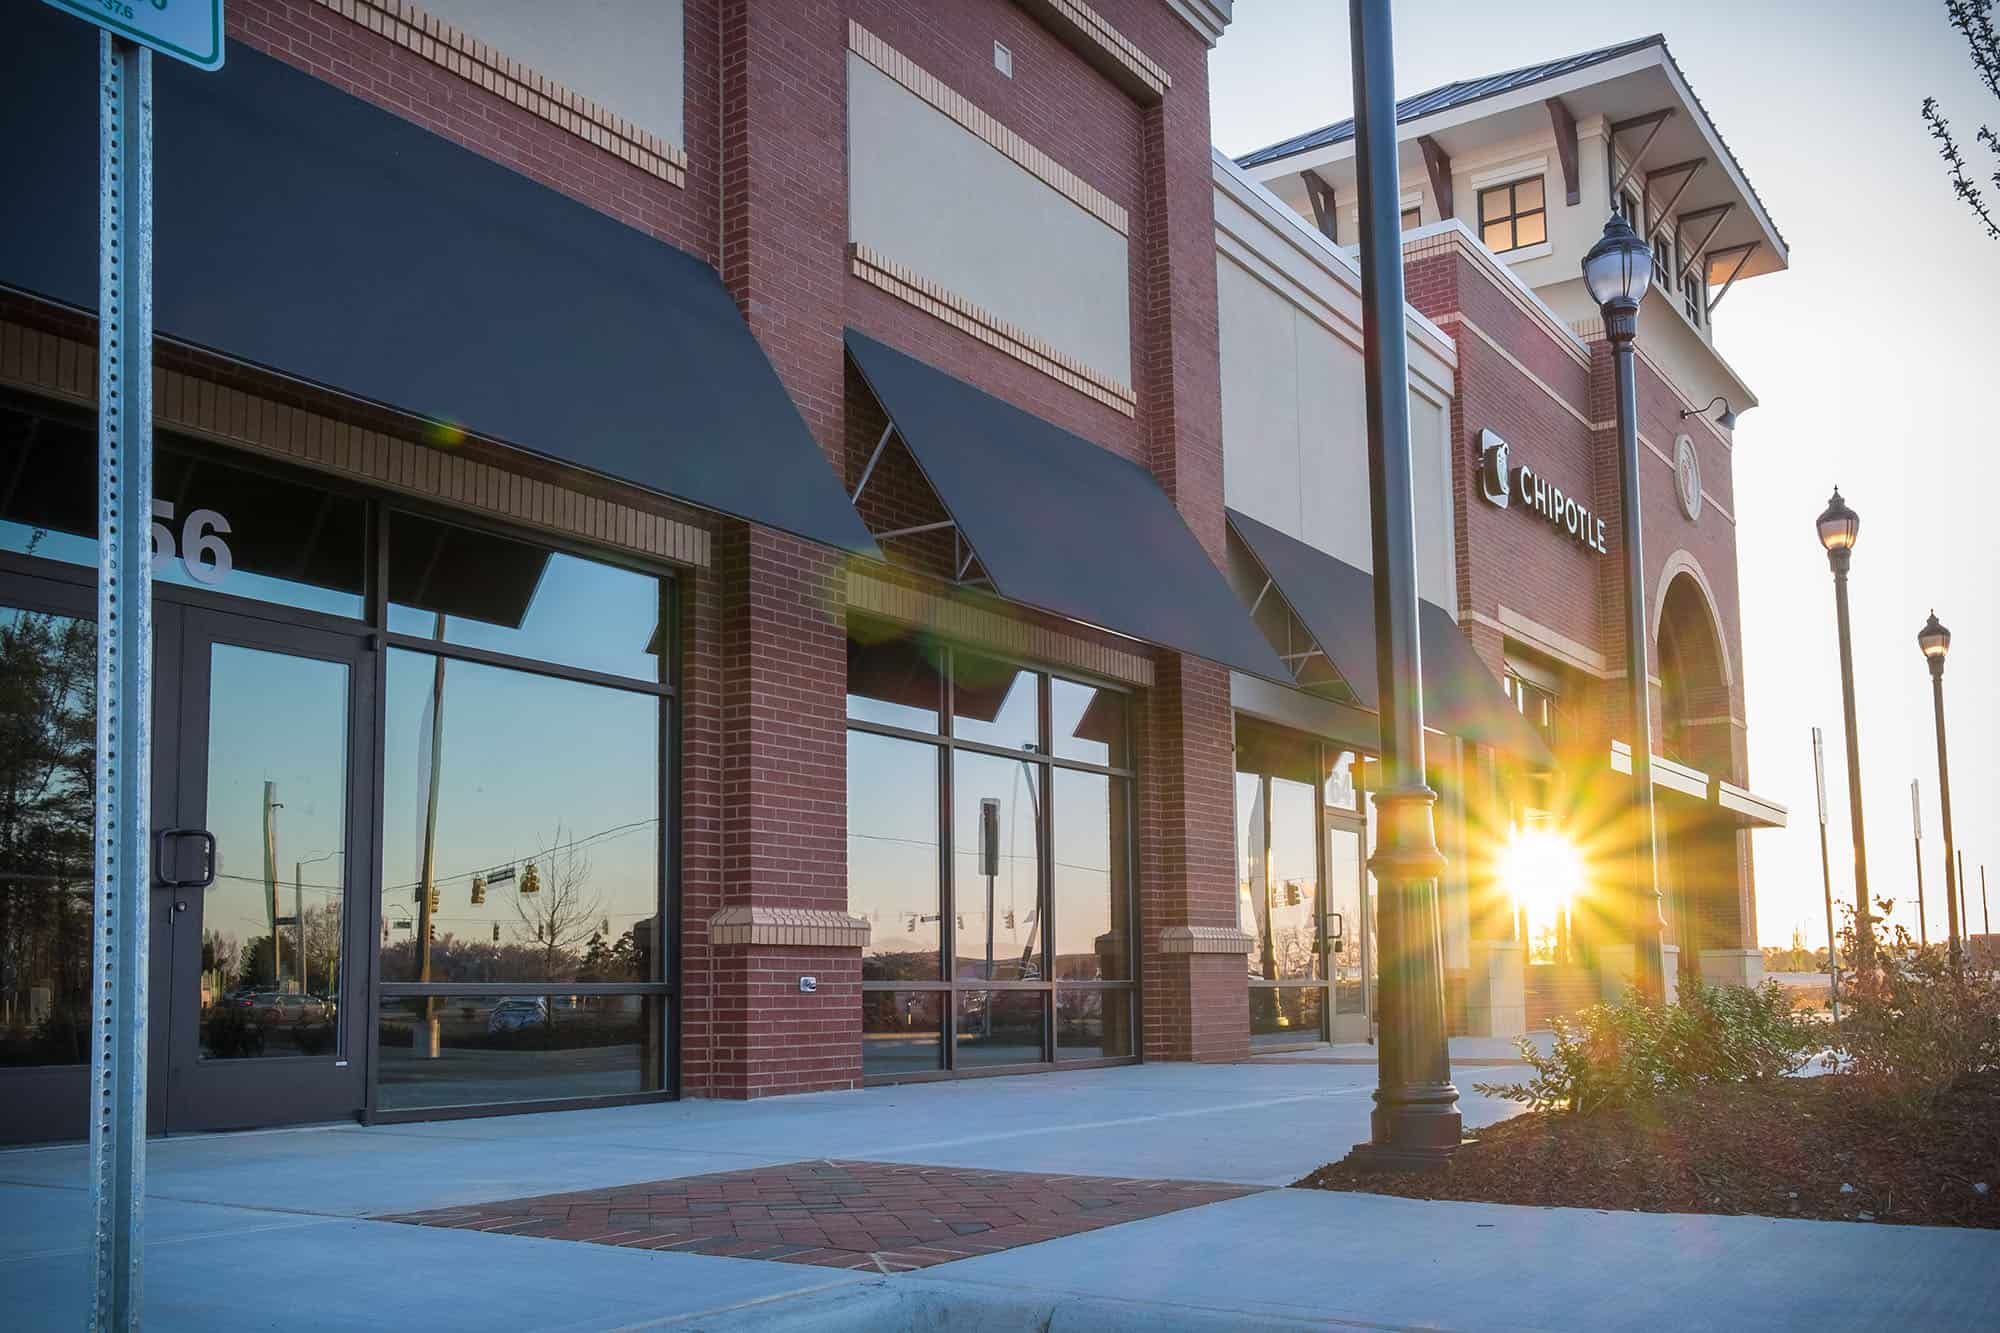 Side view of White Oak Shoppes by WIMCO in Garner, NC at sunrise.